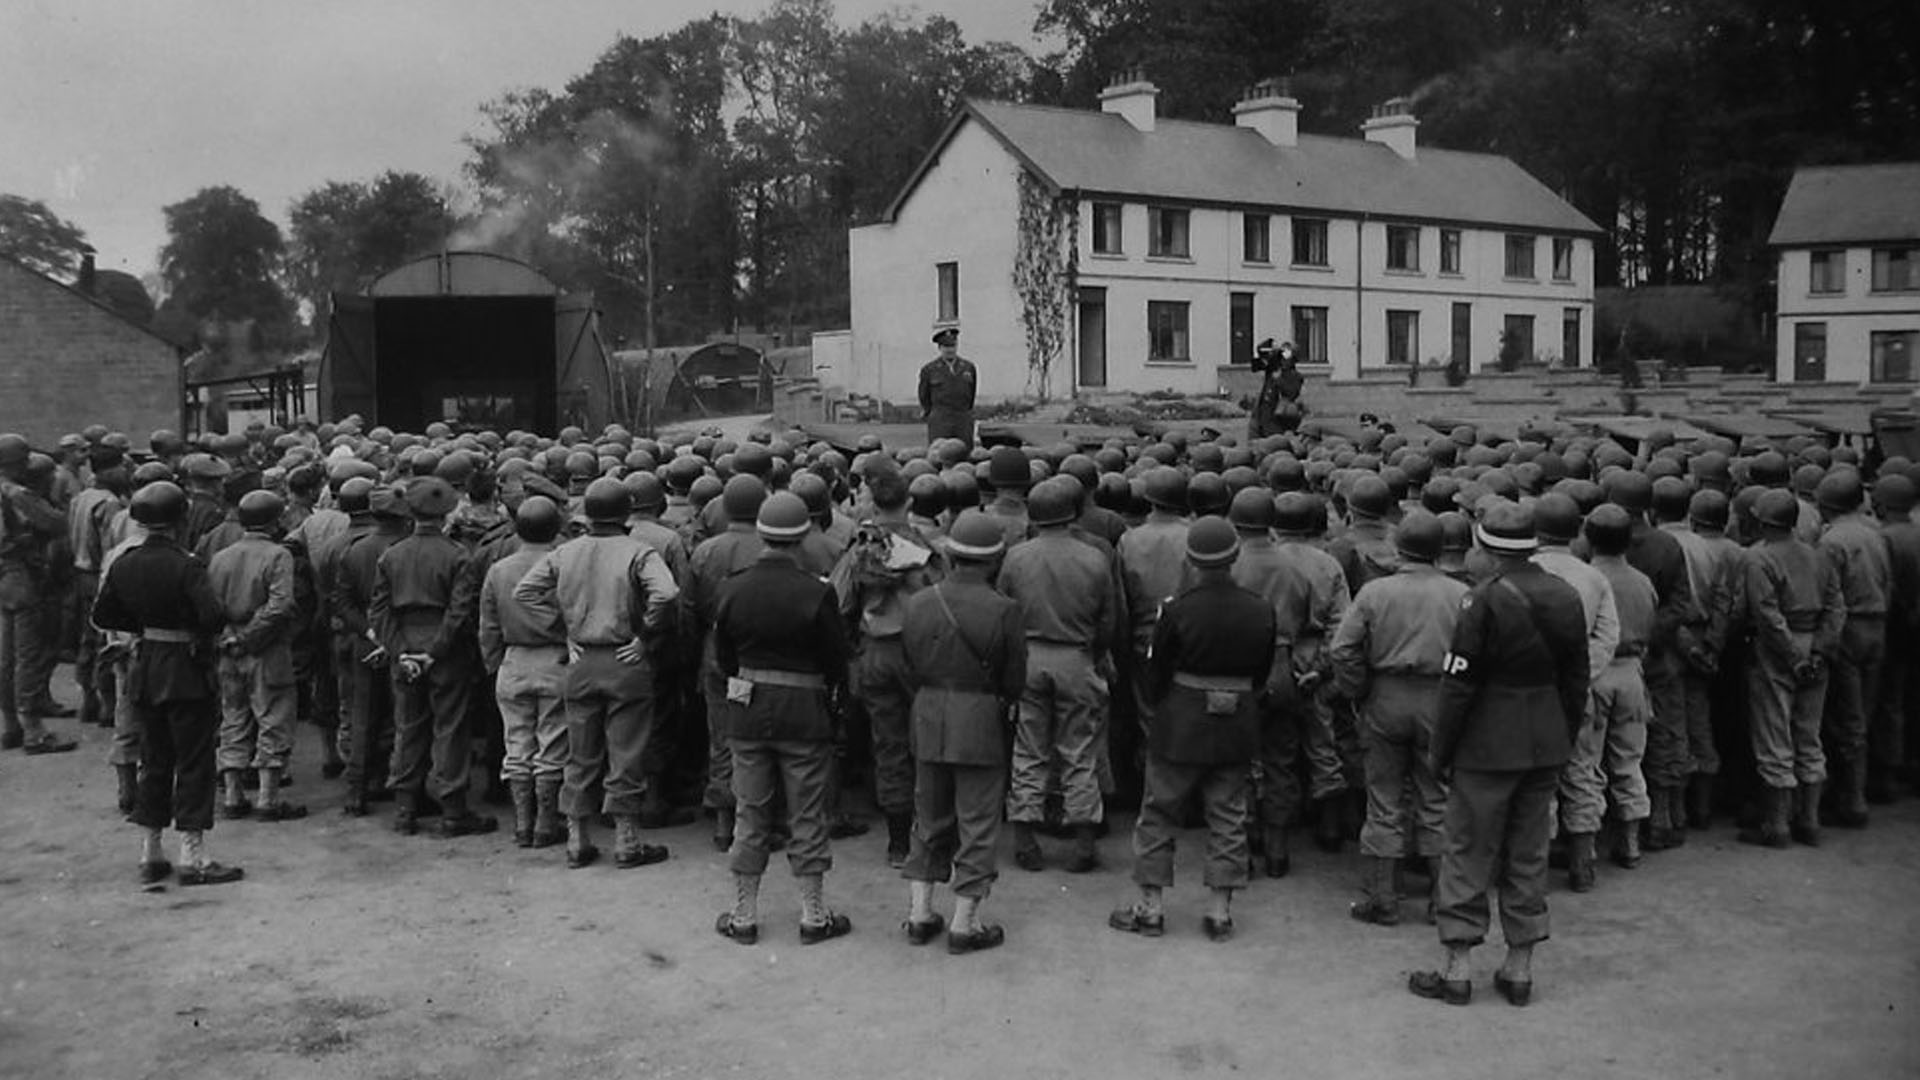 General Dwight D Eisenhower, Supreme Allied Commander of the Allied Expeditionary Forces in Great Britain inspects US Army troops from an Infantry Division at Celtic Park, Enniskillen, Co. Fermanagh. Copyright unknown.